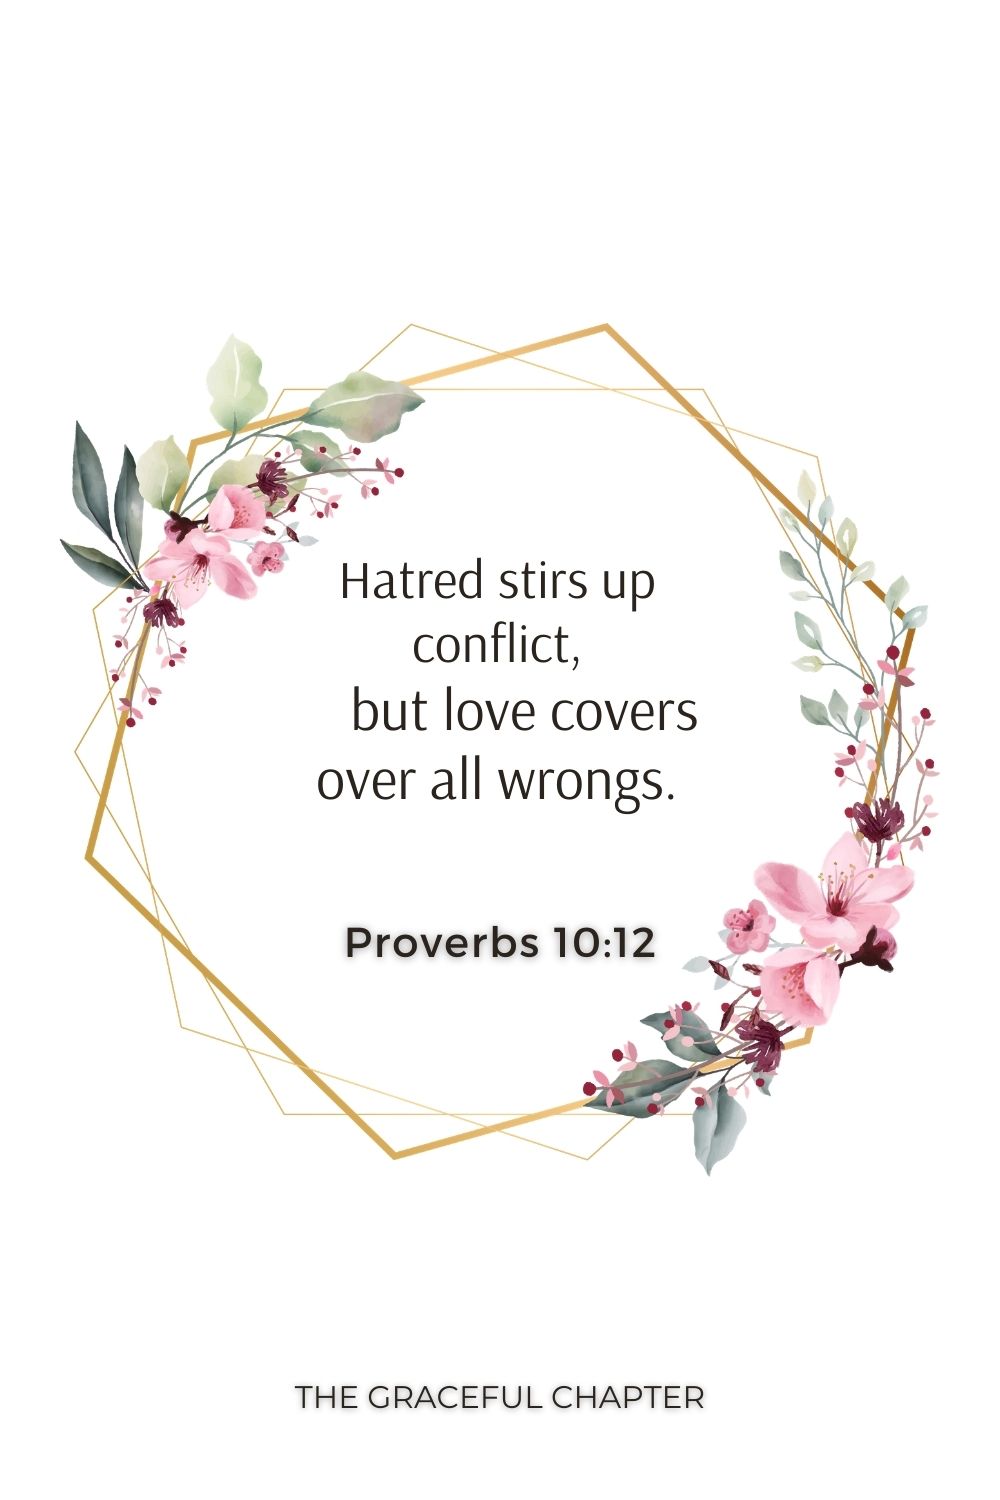 Hatred stirs up conflict,     but love covers over all wrongs. Proverbs 10:12